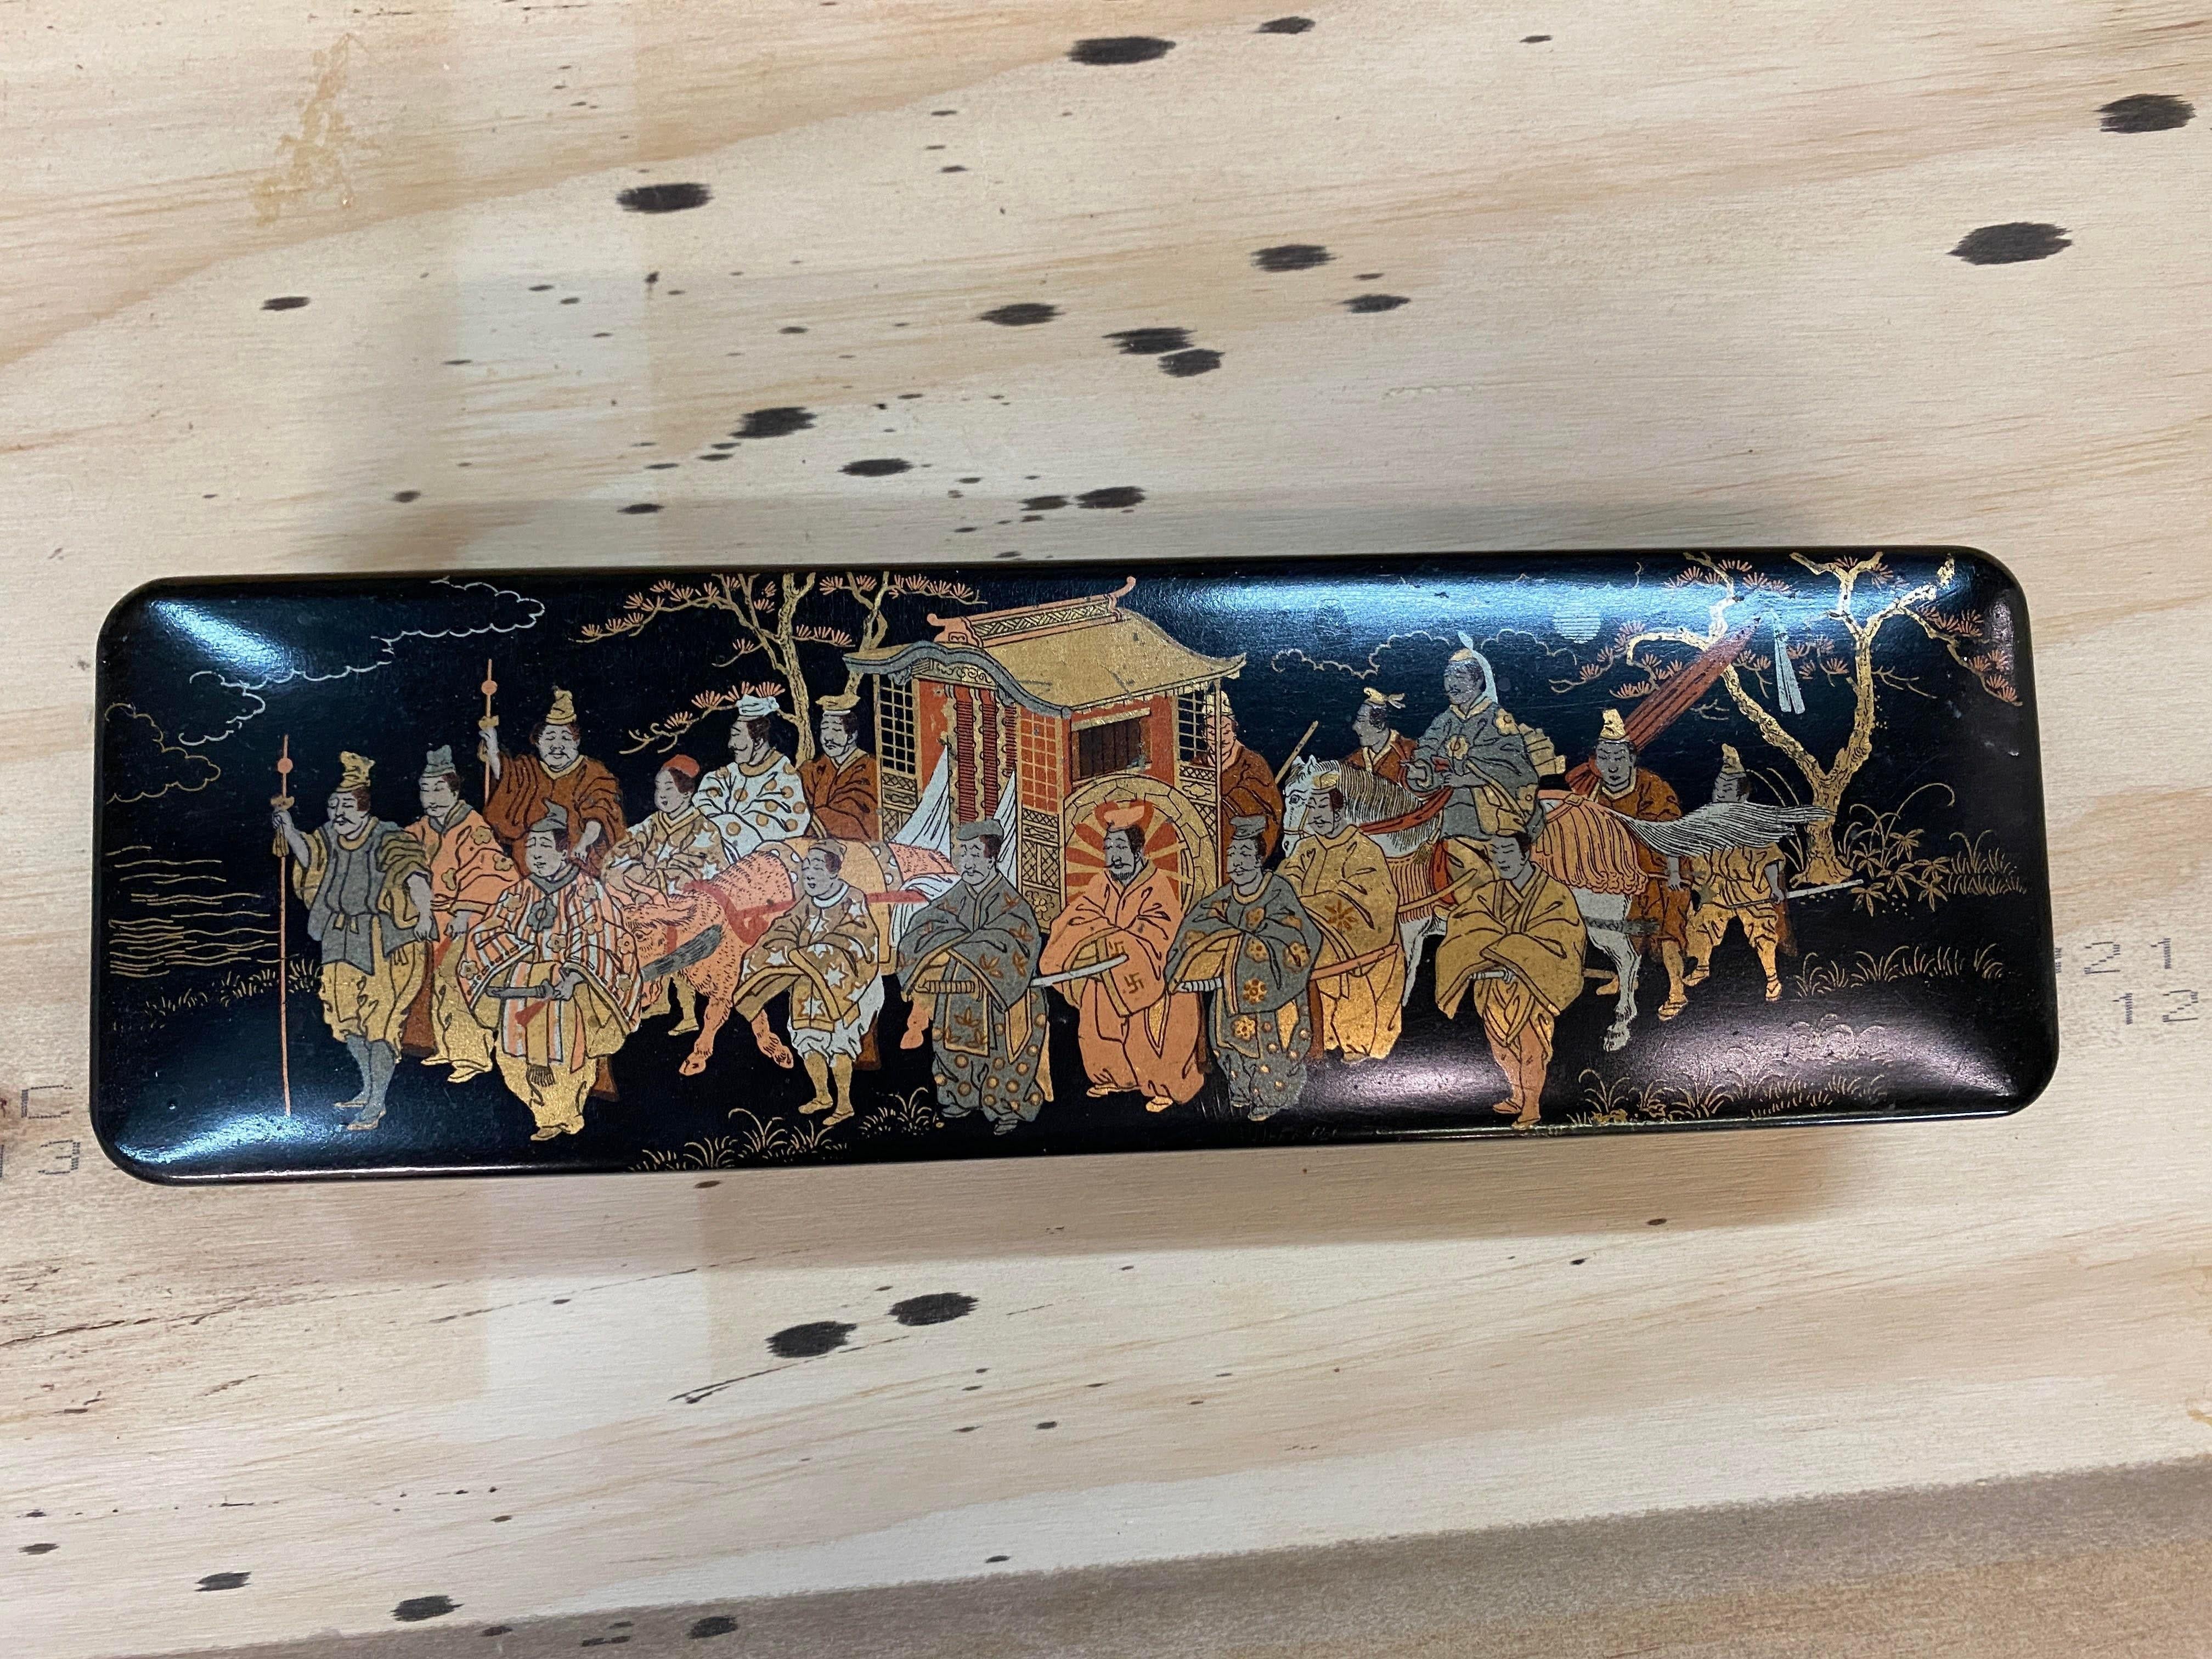 Black, Gold and Red Lacquer Japanese Document Fubako Box, Meiji period, late 19th C/Early 20th C. A Japanese lacquer box featuring hand decorated gold paint depicting scholars and samurai walking in a royal procession.

Acquired from an antique